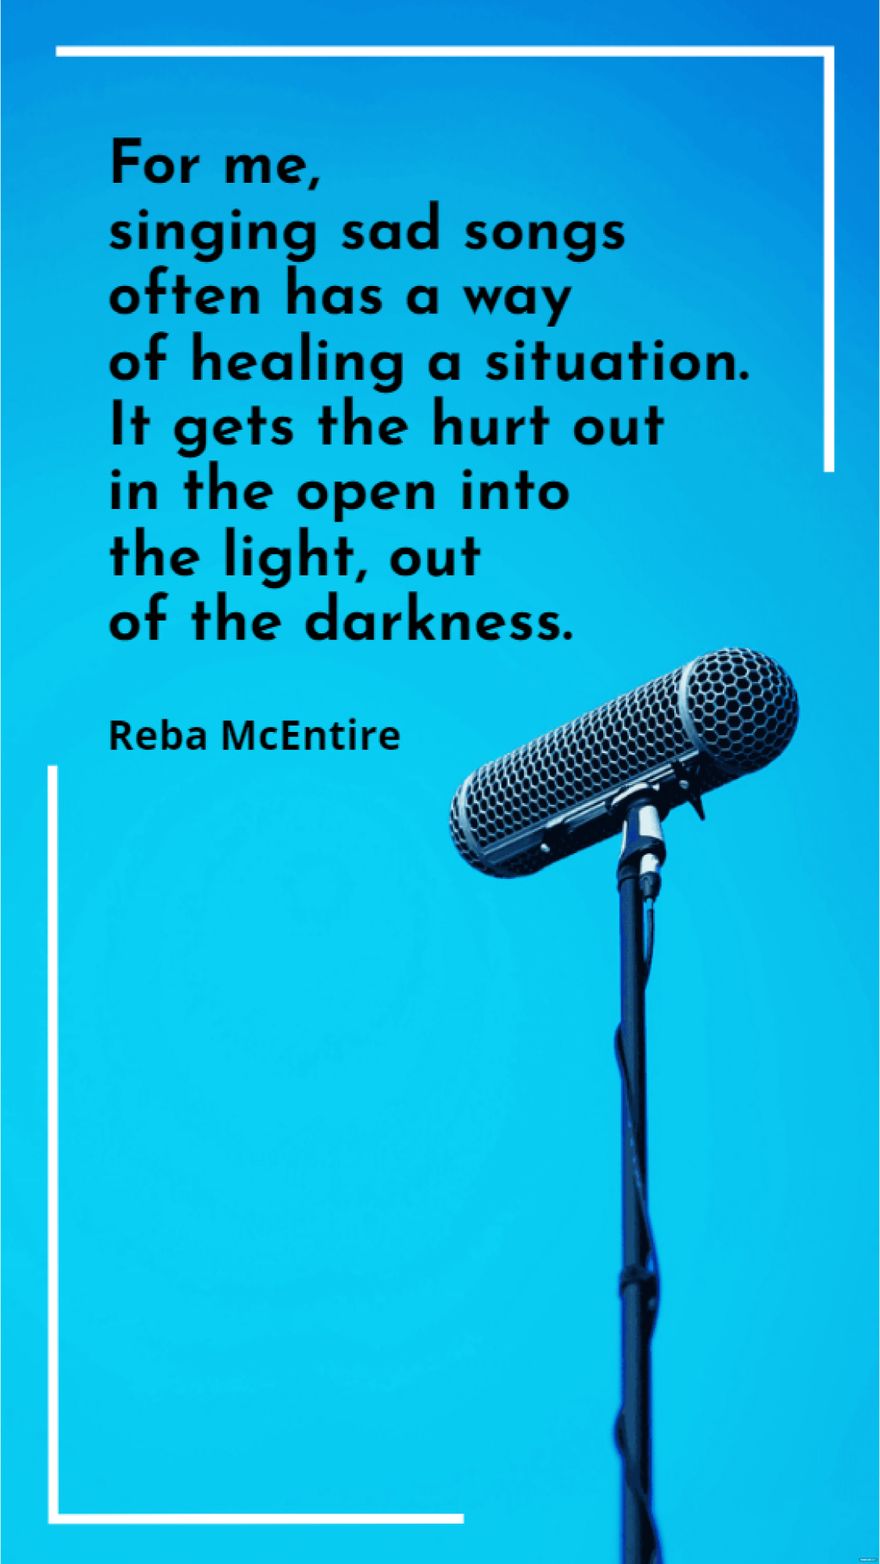 Reba McEntire - For me, singing sad songs often has a way of healing a situation. It gets the hurt out in the open into the light, out of the darkness.